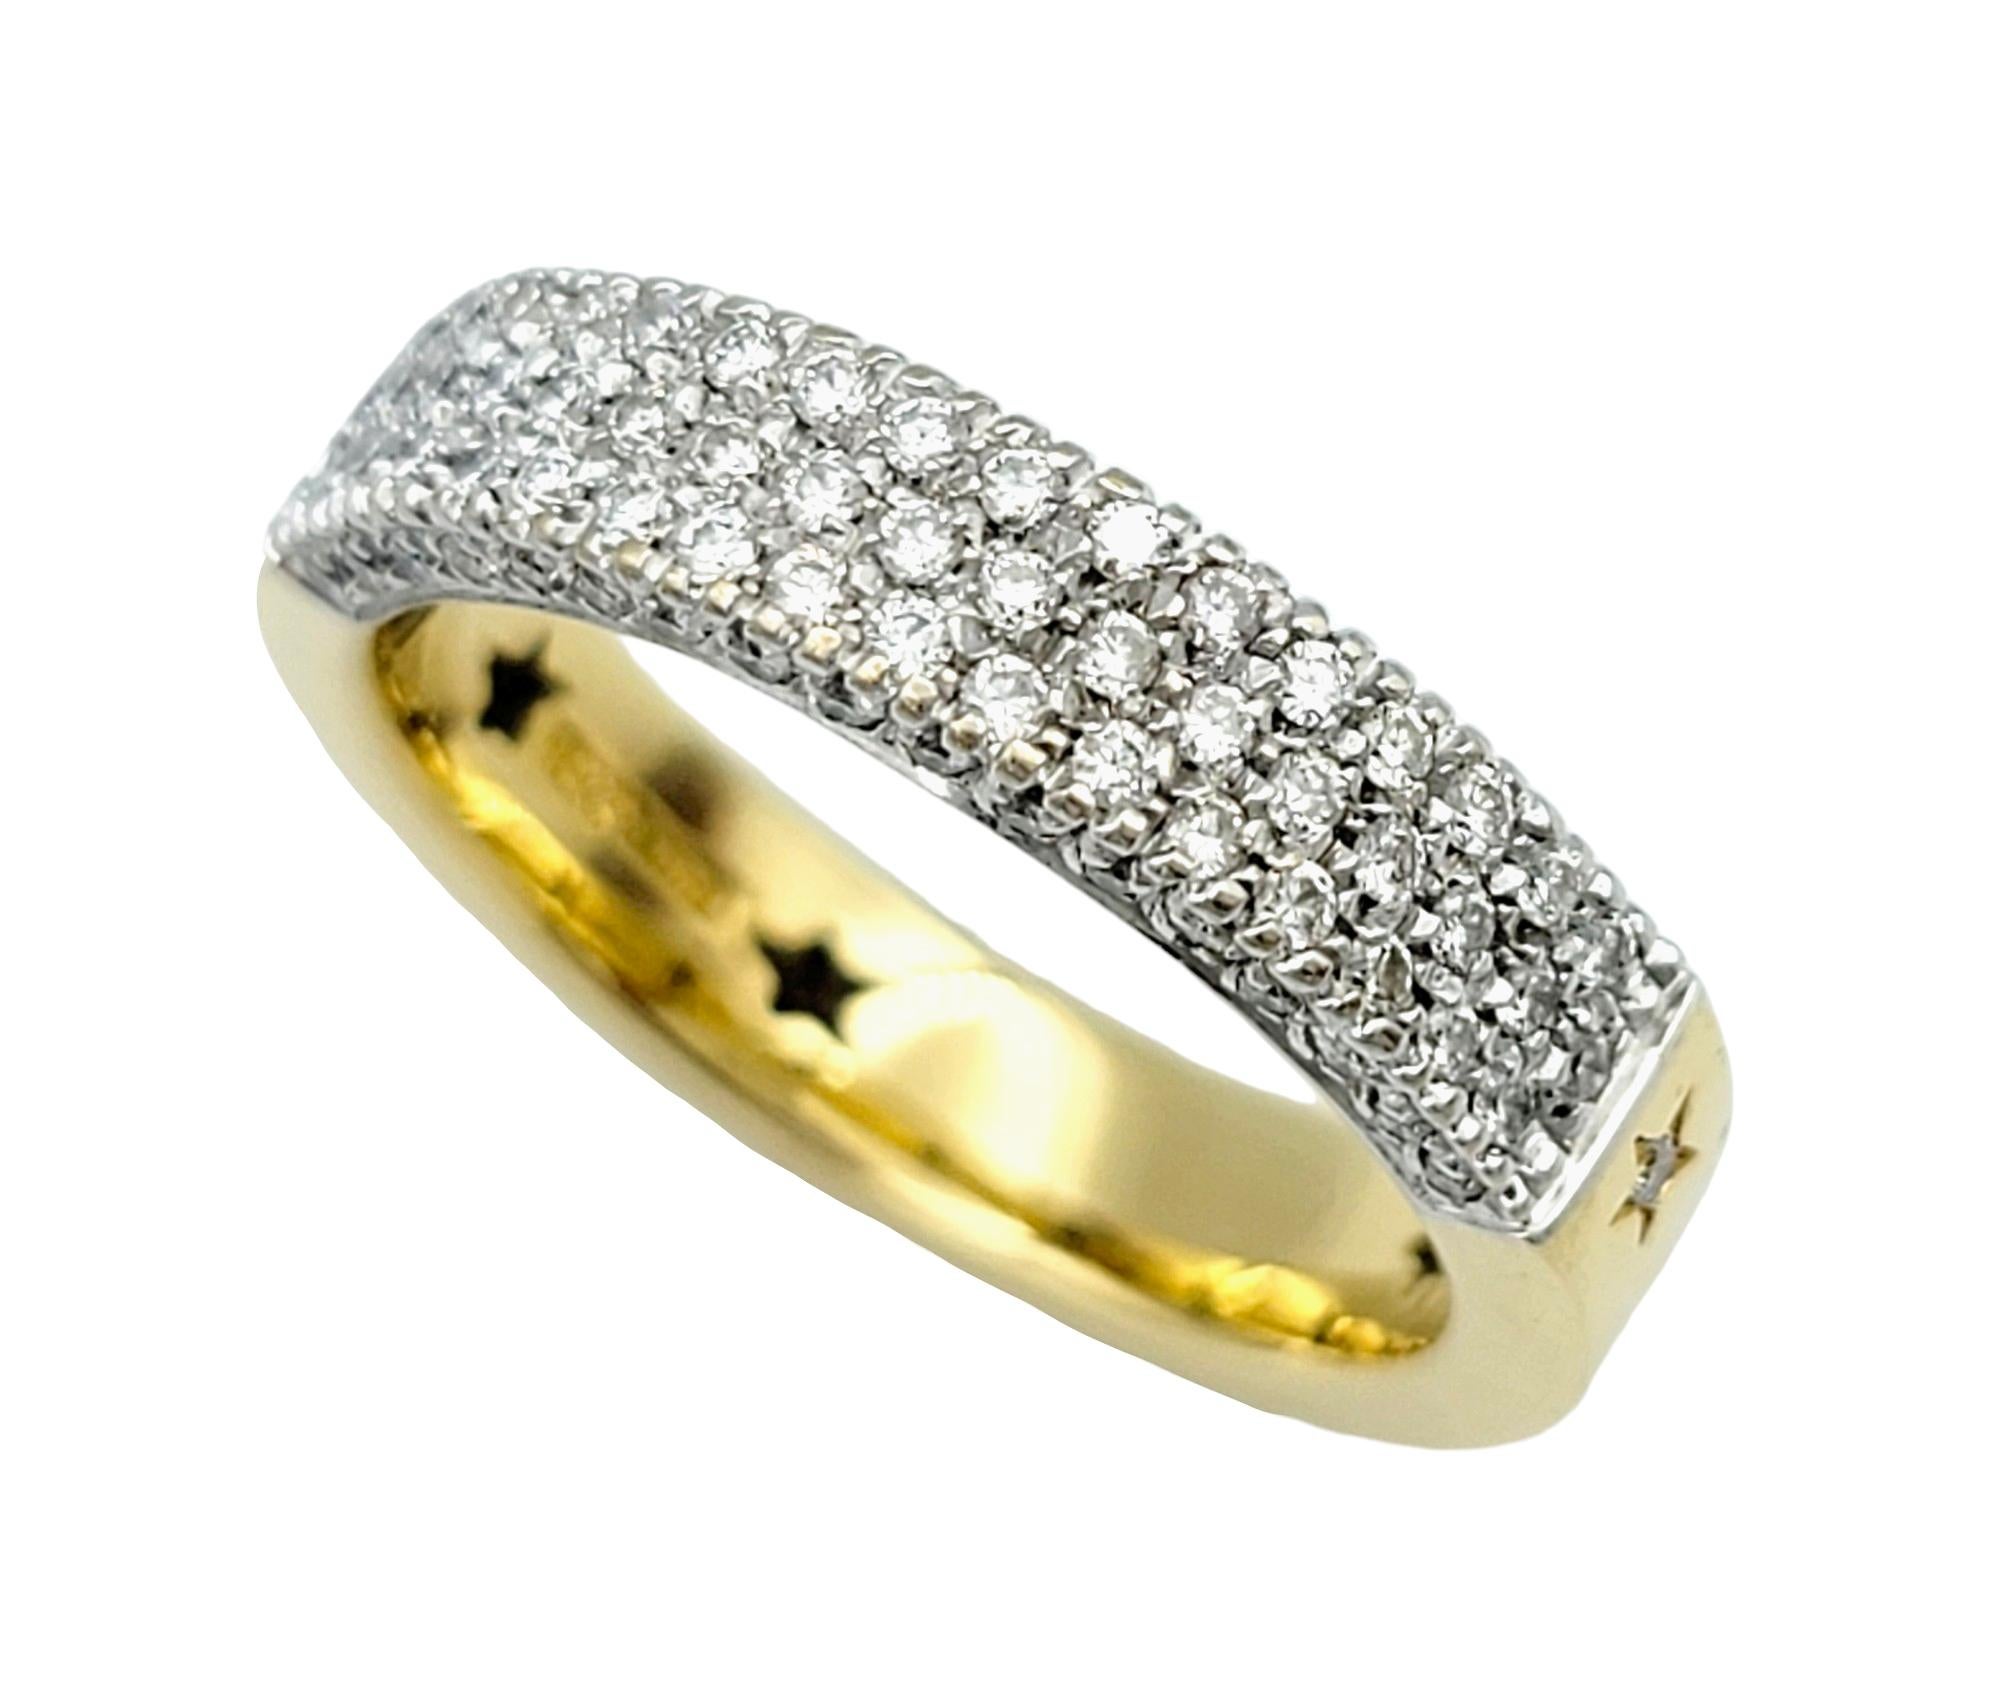 Contemporary H. Stern Triple Row Diamond Band Ring with Star Designs in 18 Karat Yellow Gold For Sale